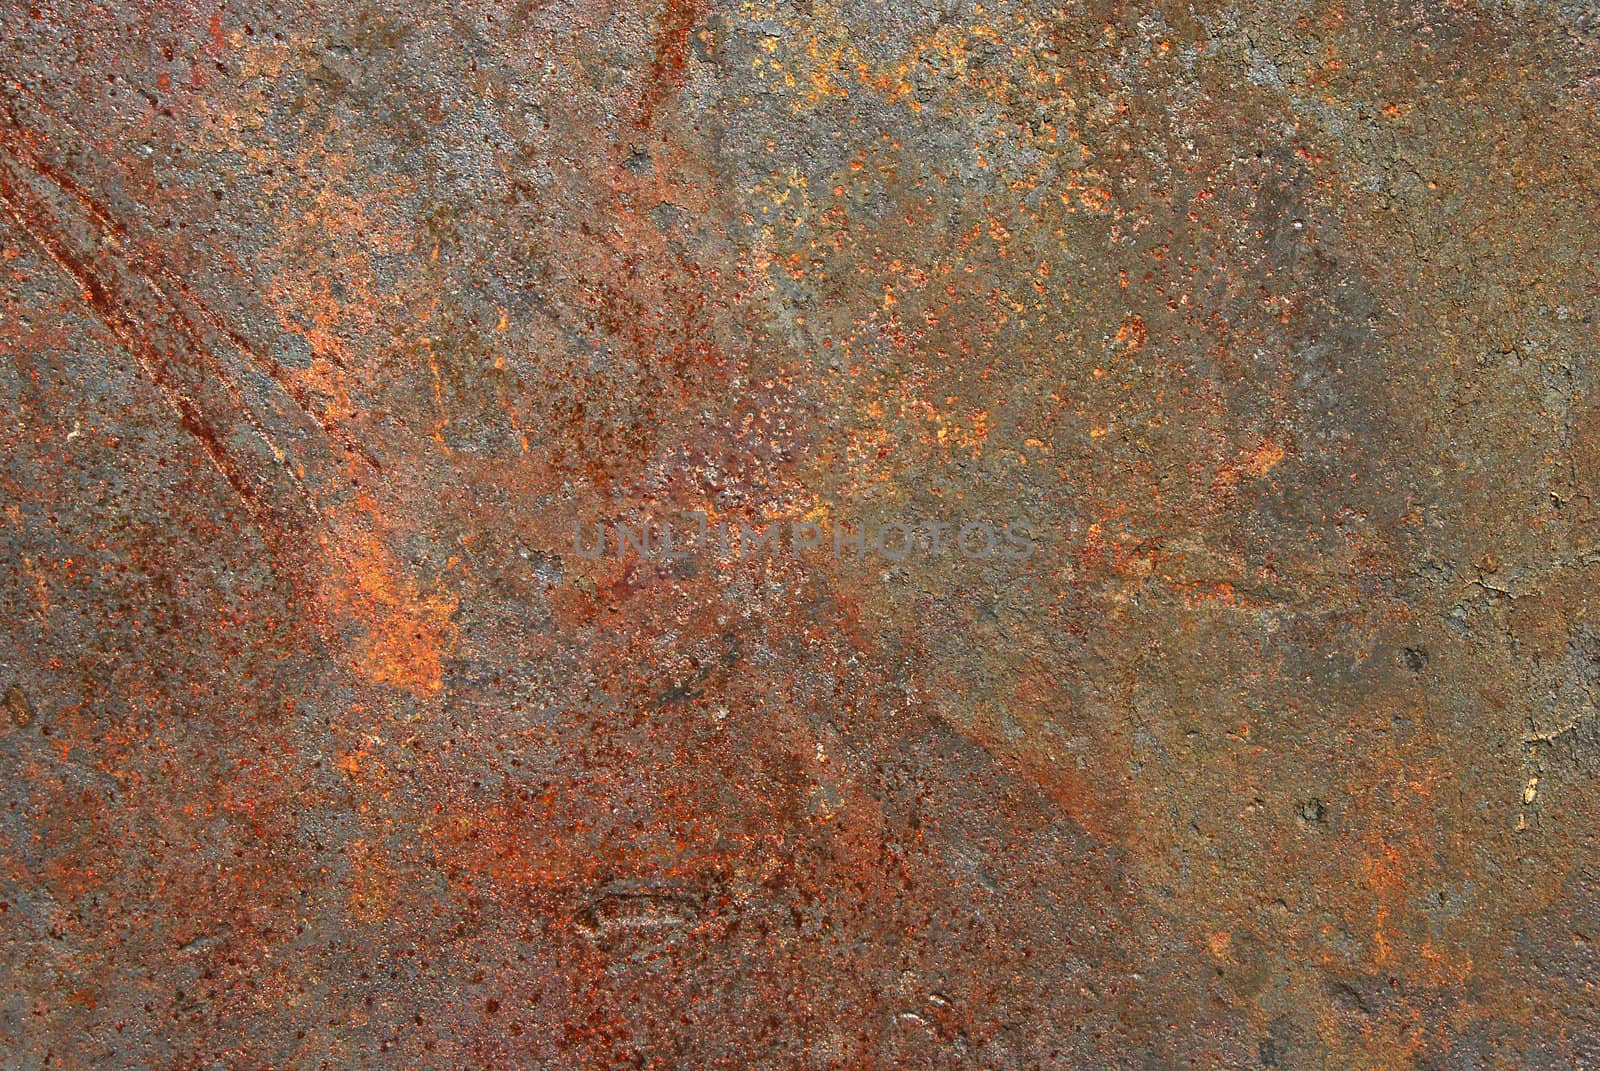 Rusty iron sheet surface close-up as background